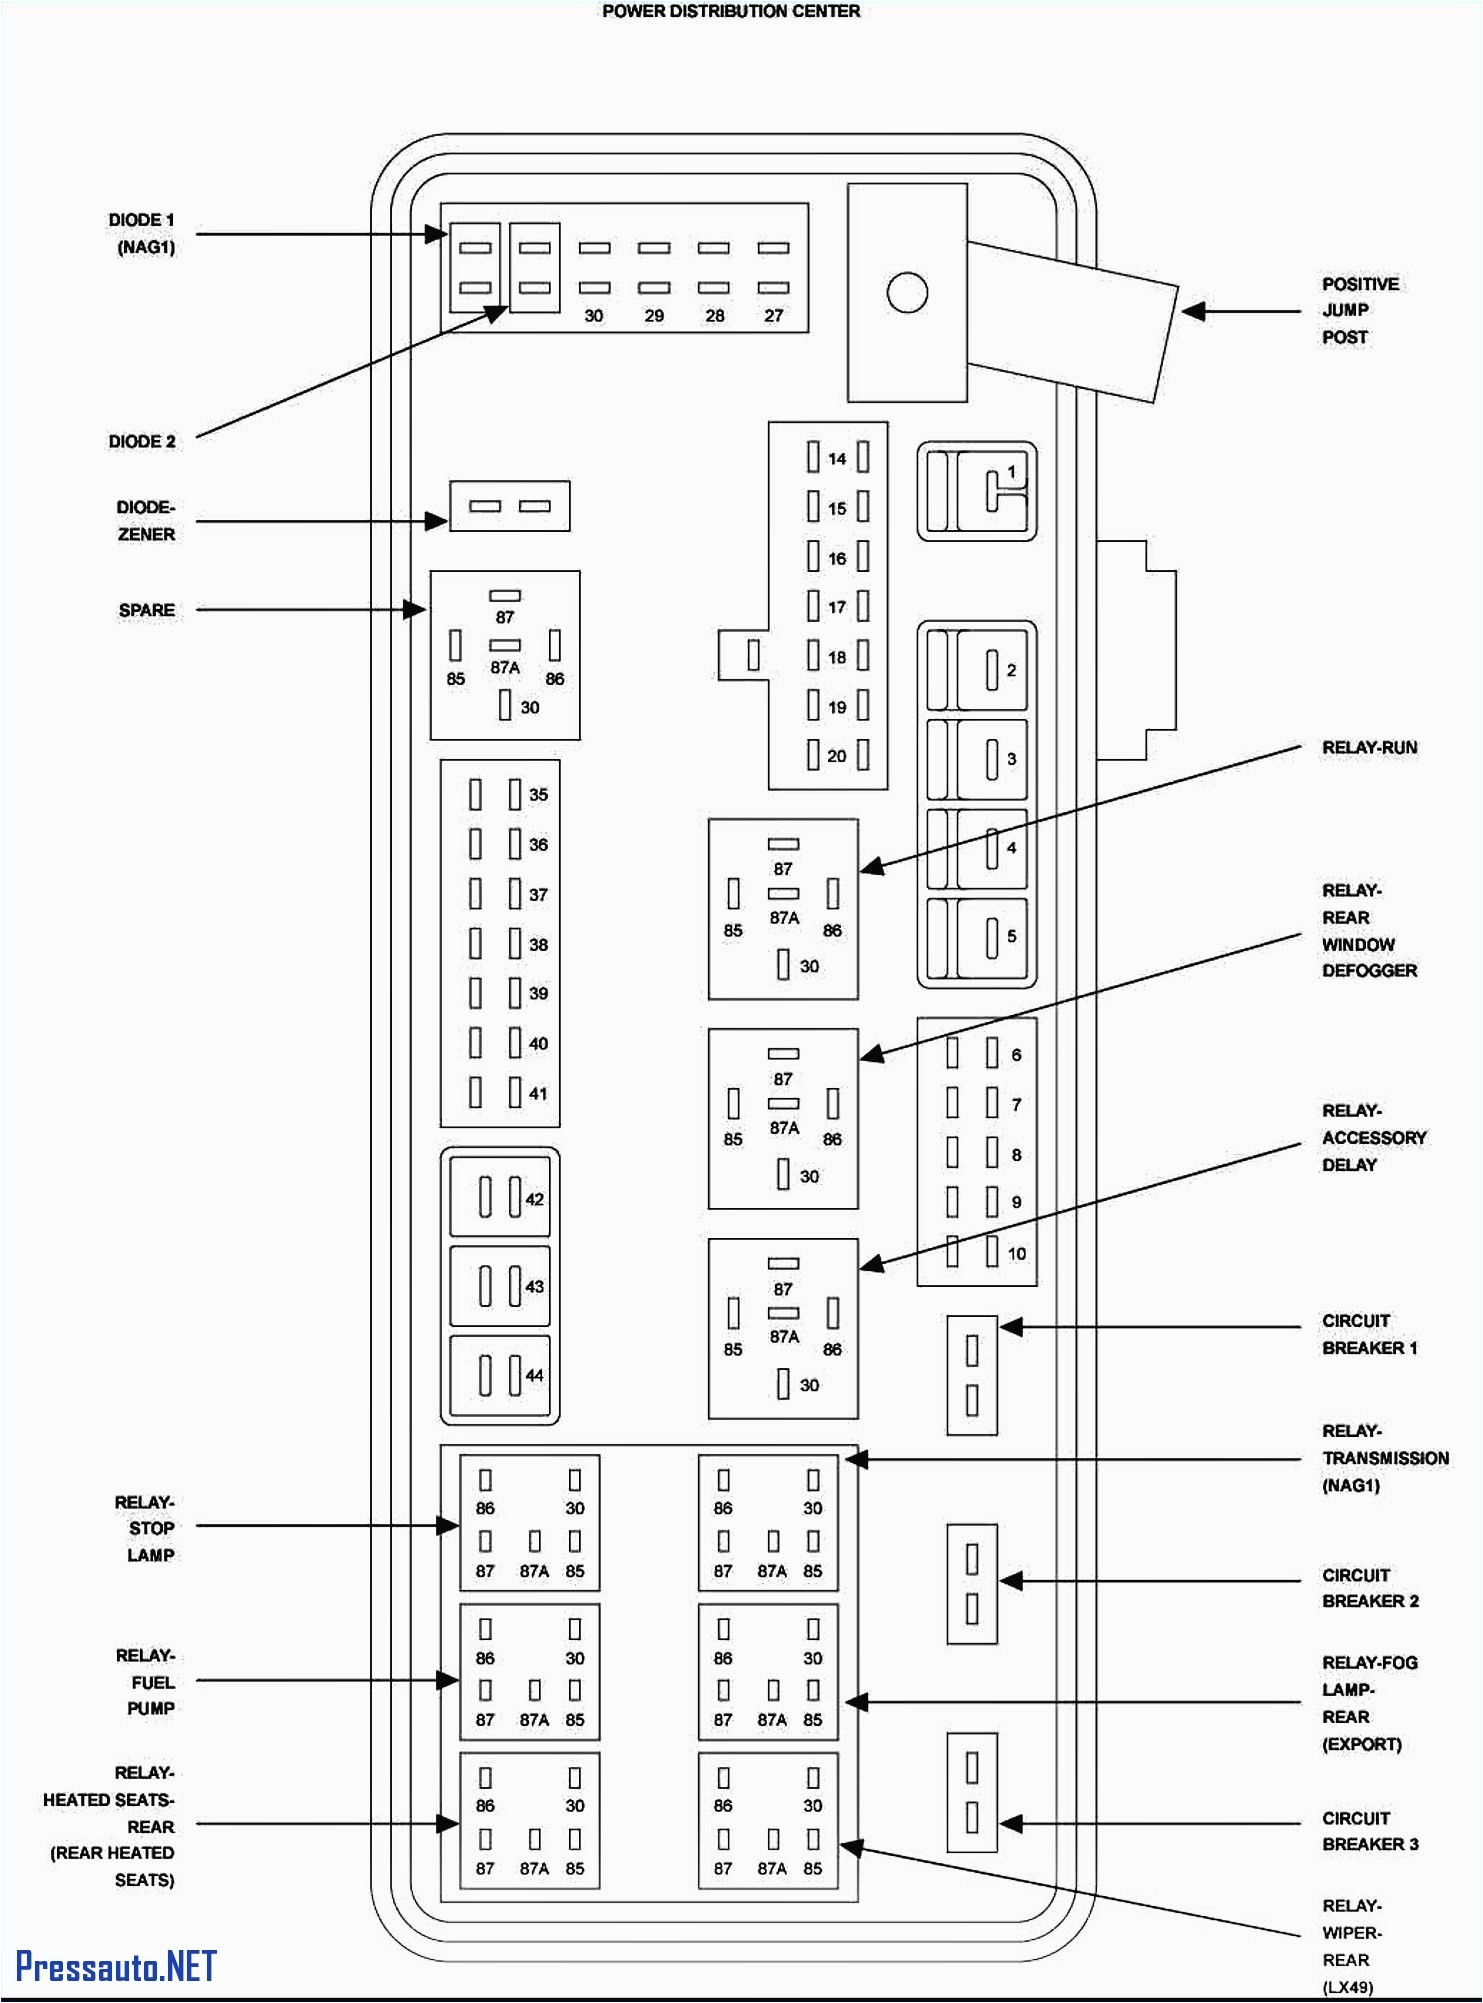 wiring diagram fabulous jeep liberty fuse boxrysler engine images dodgearger town and country jpg